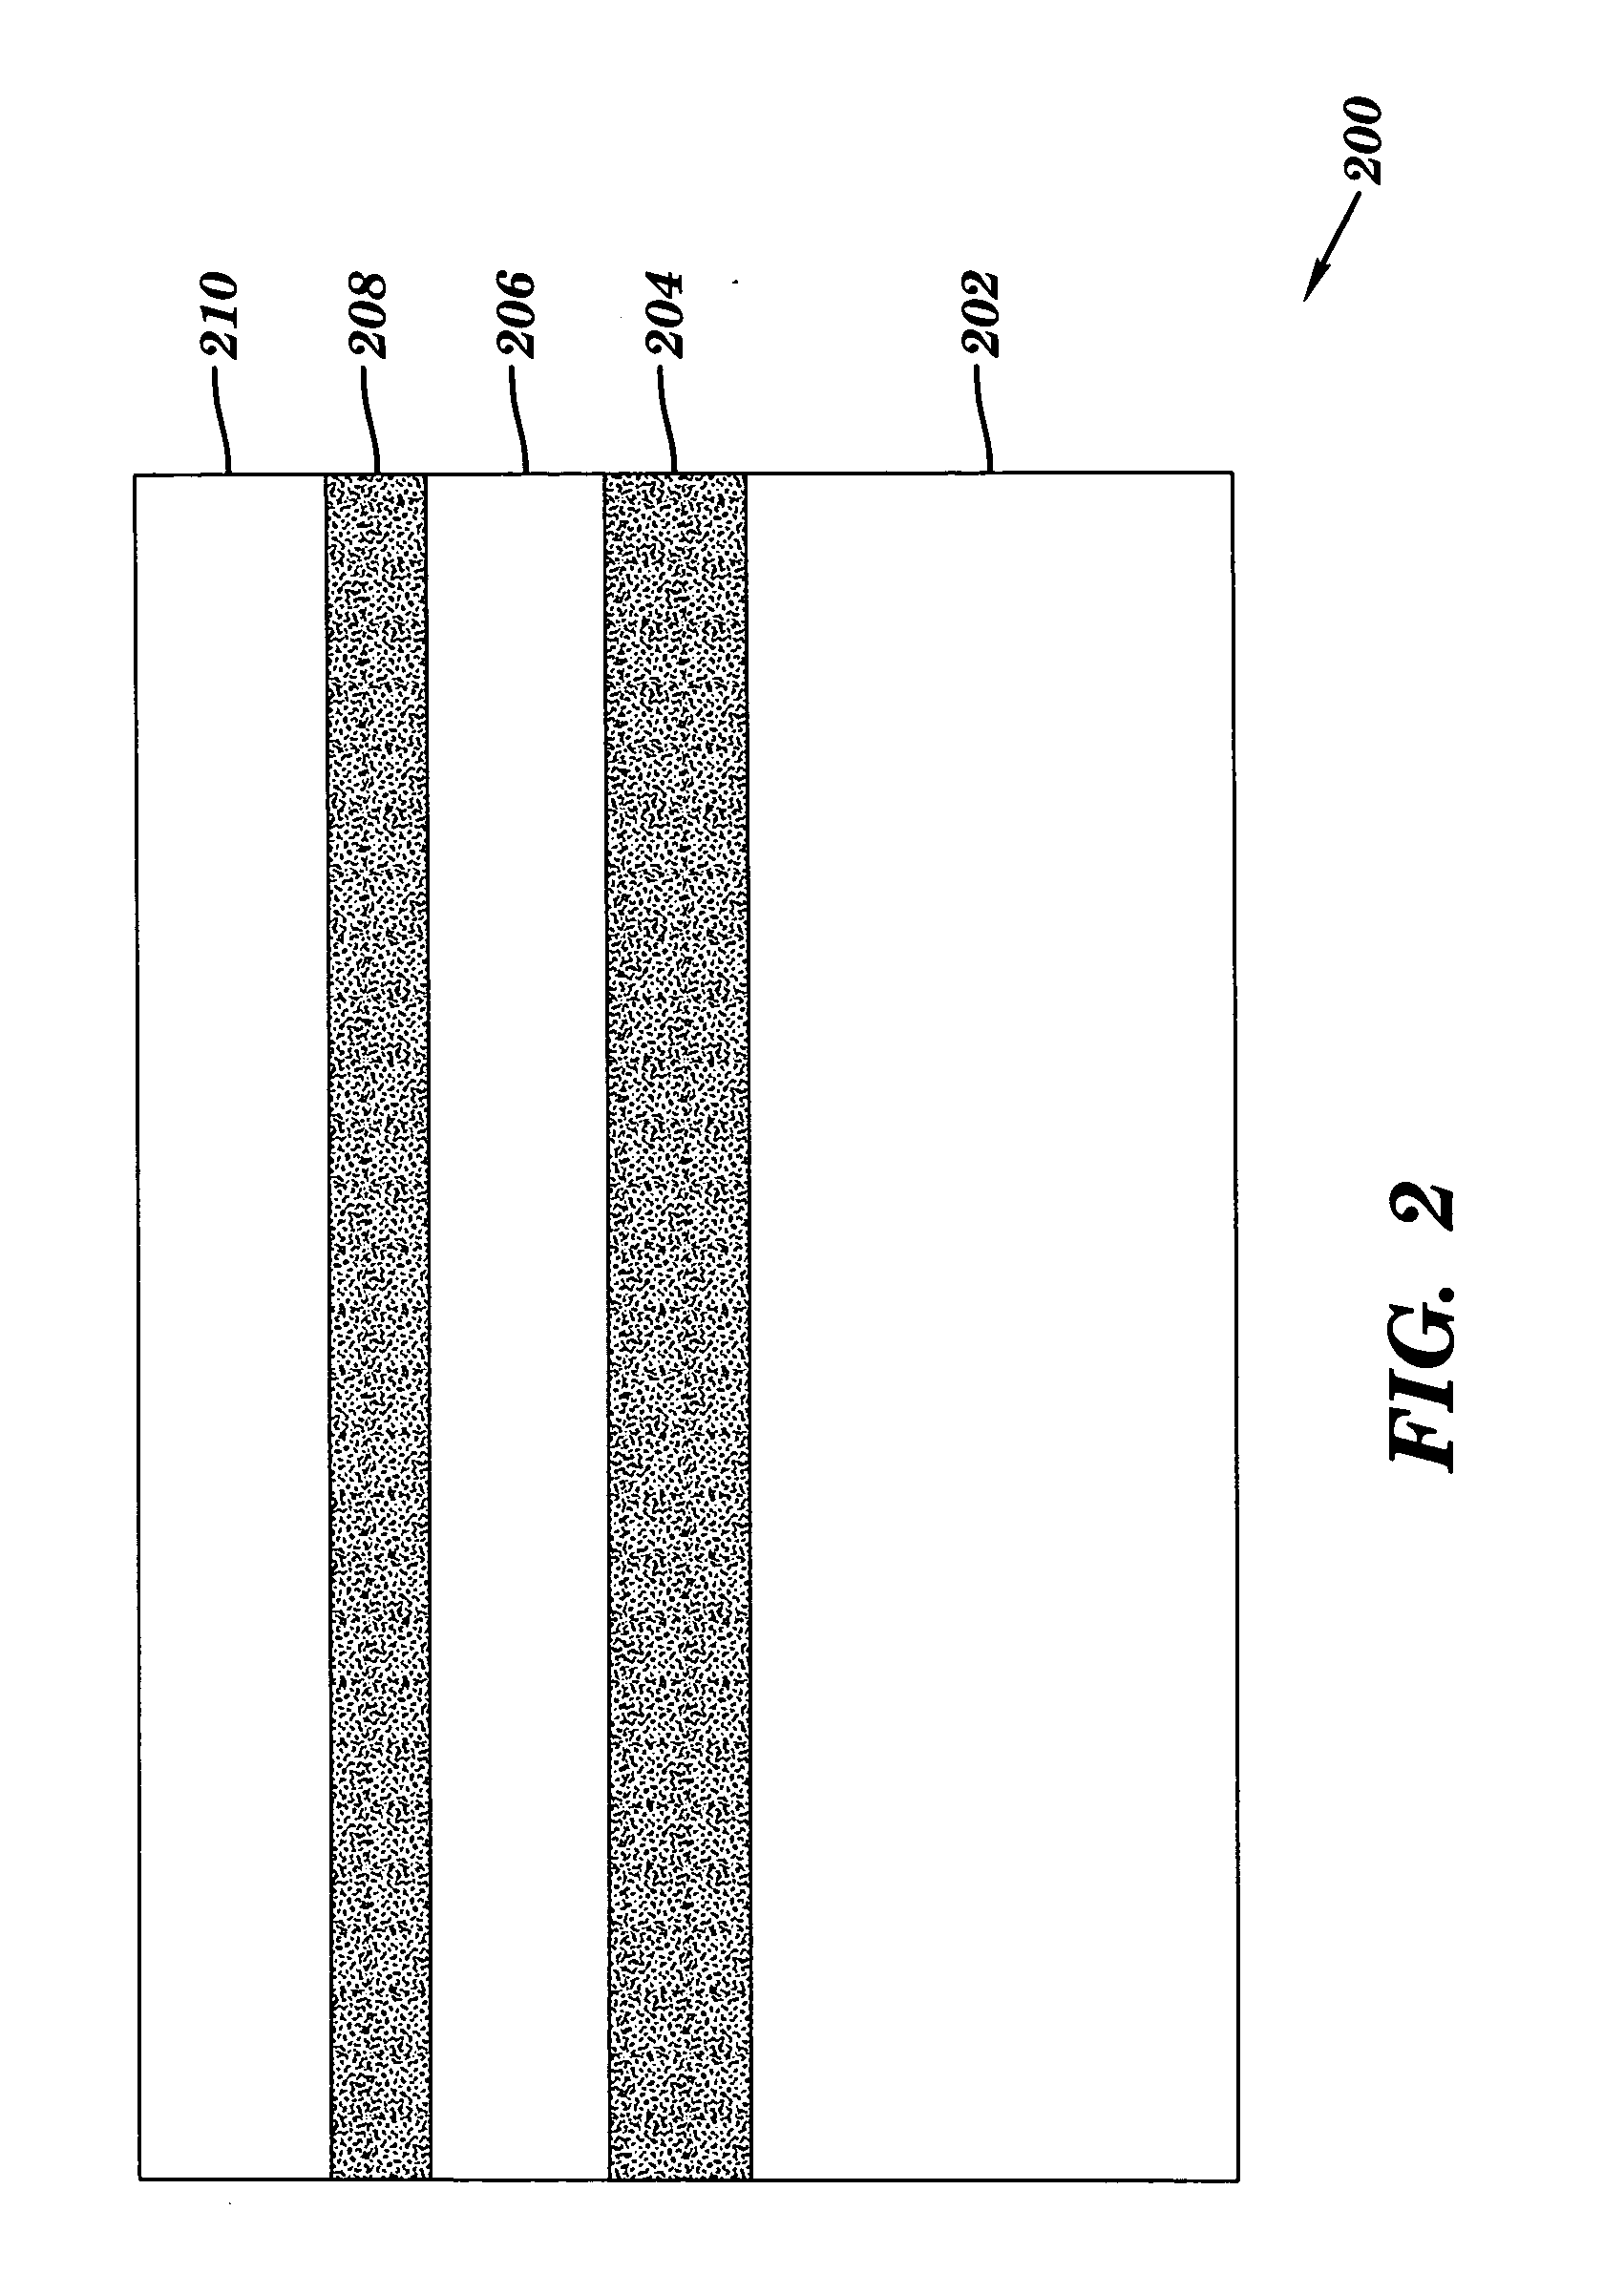 structure and method of manufacturing a finFet device having stacked fins